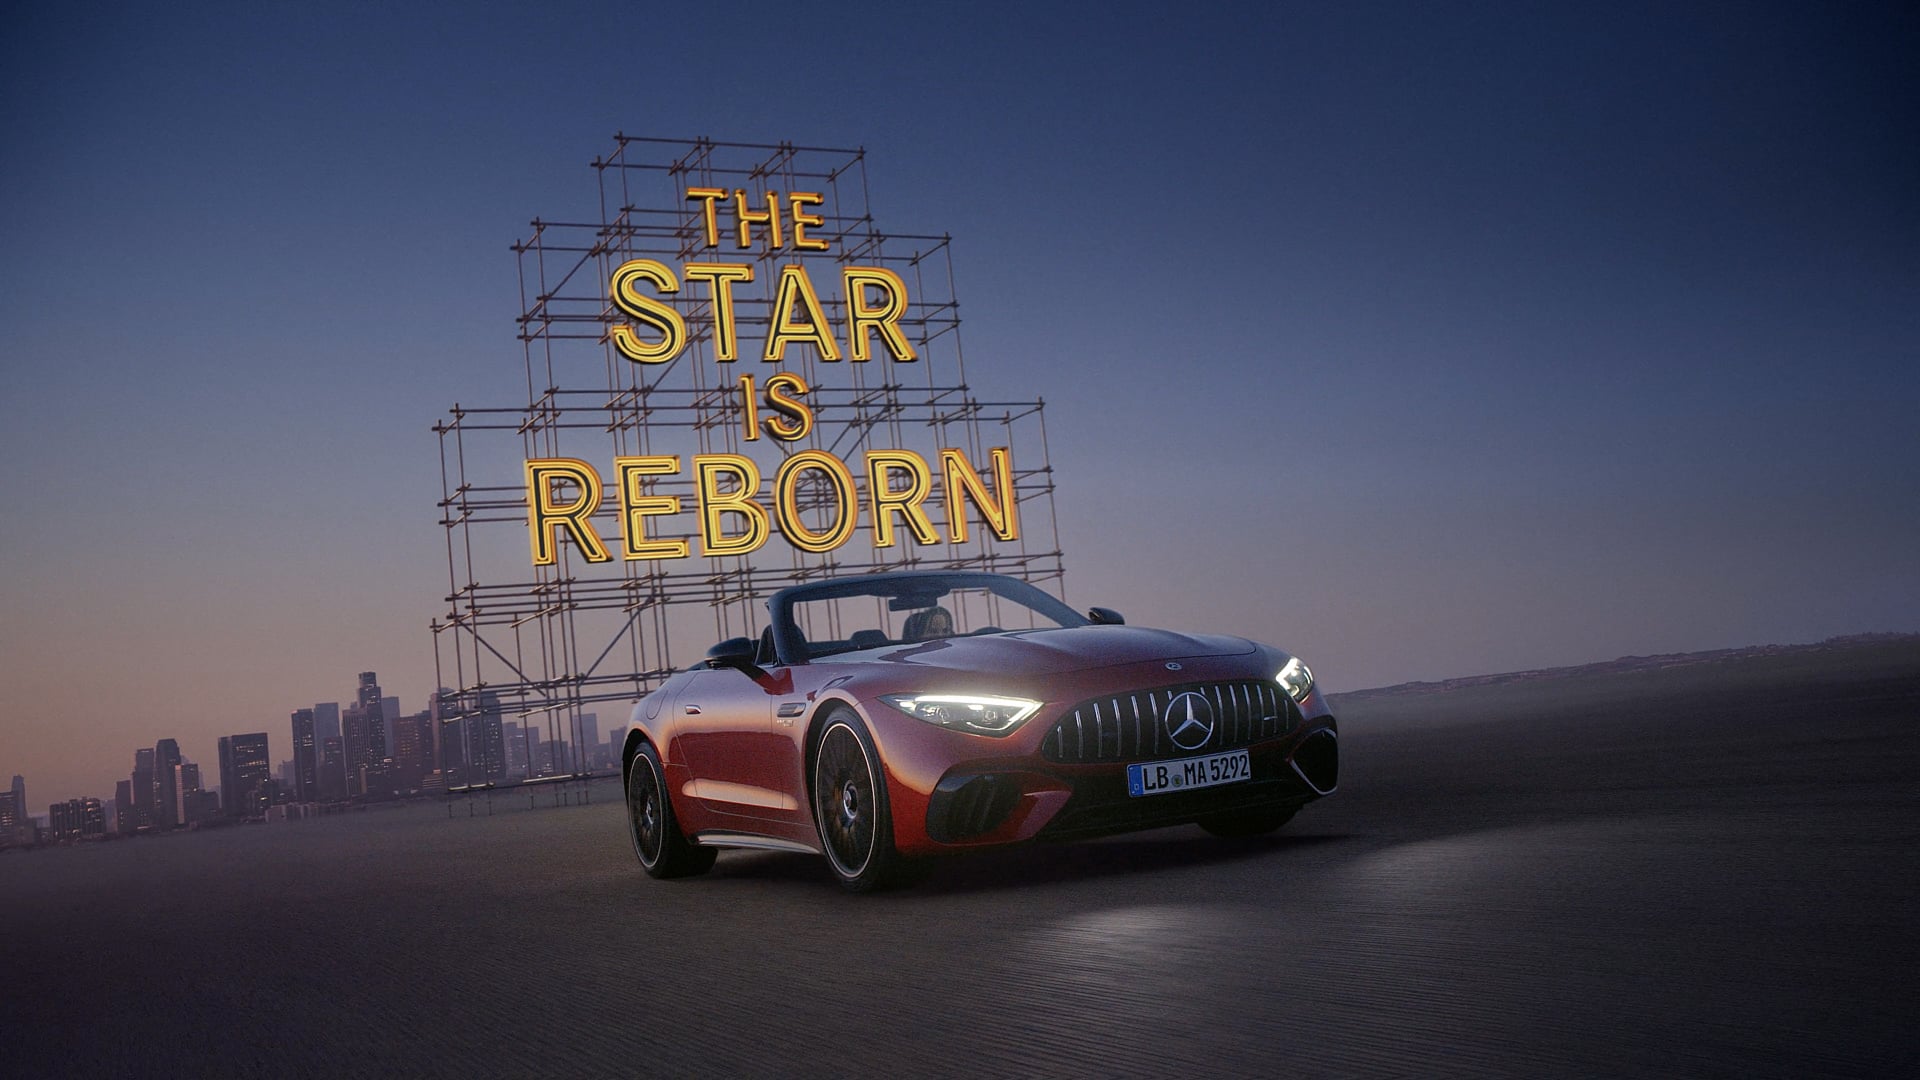 Mercedes AMG 'A Star Is Reborn' directed by Christian Larson and produced for Somesuch